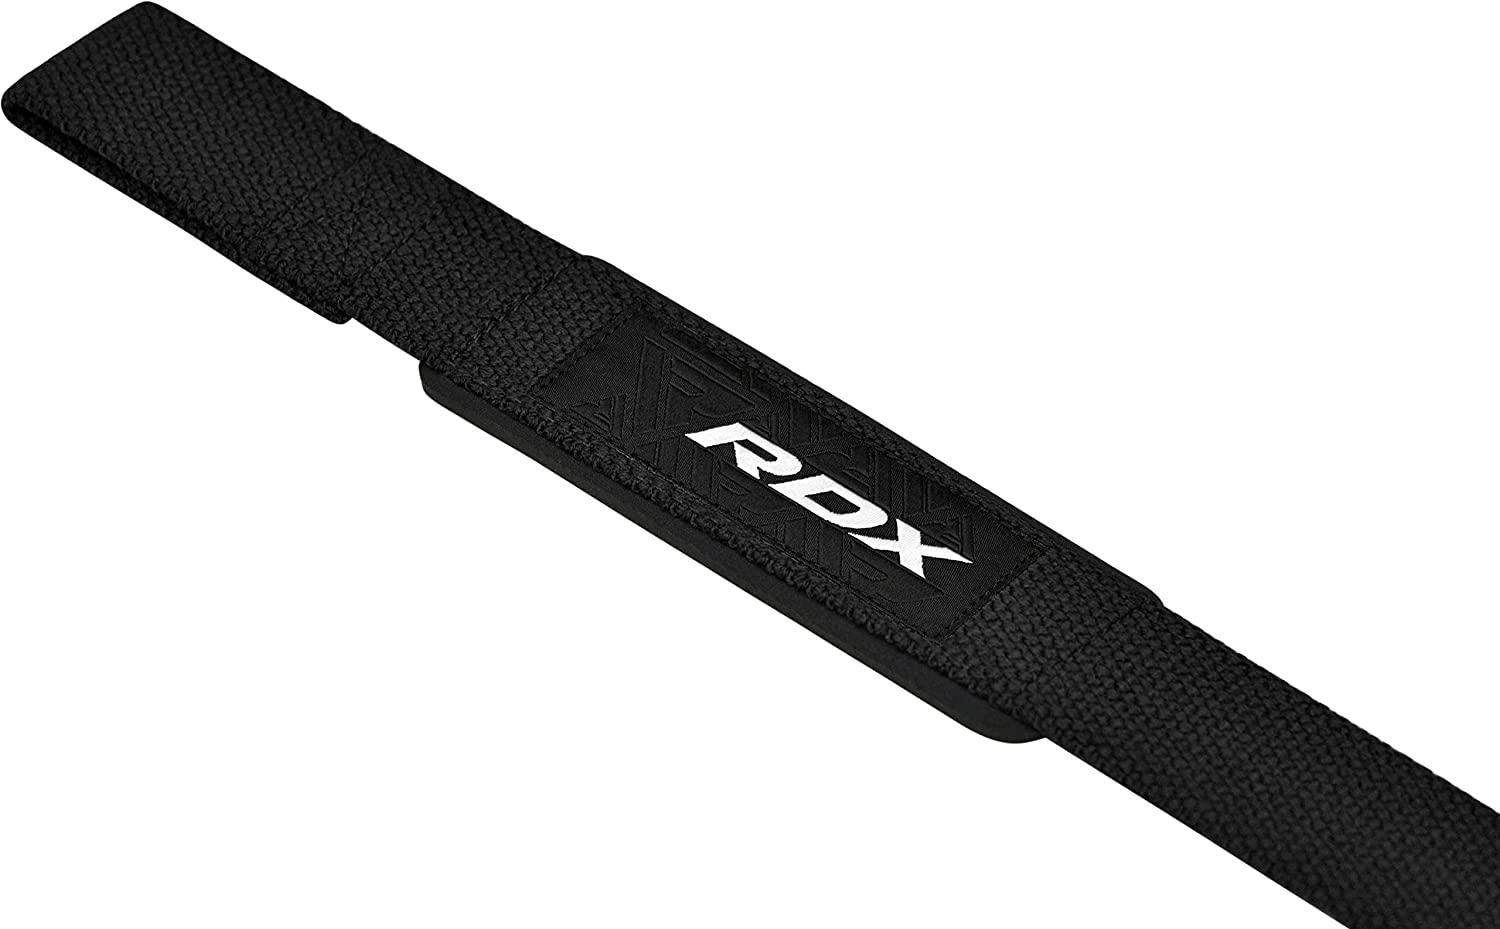 RDX Lifting Wrist Straps for Weightlifting, 5MM Neoprene Padded Anti Slip  60CM Hand Bar Support Grips, Strength Training Equipment Heavy Duty Workout